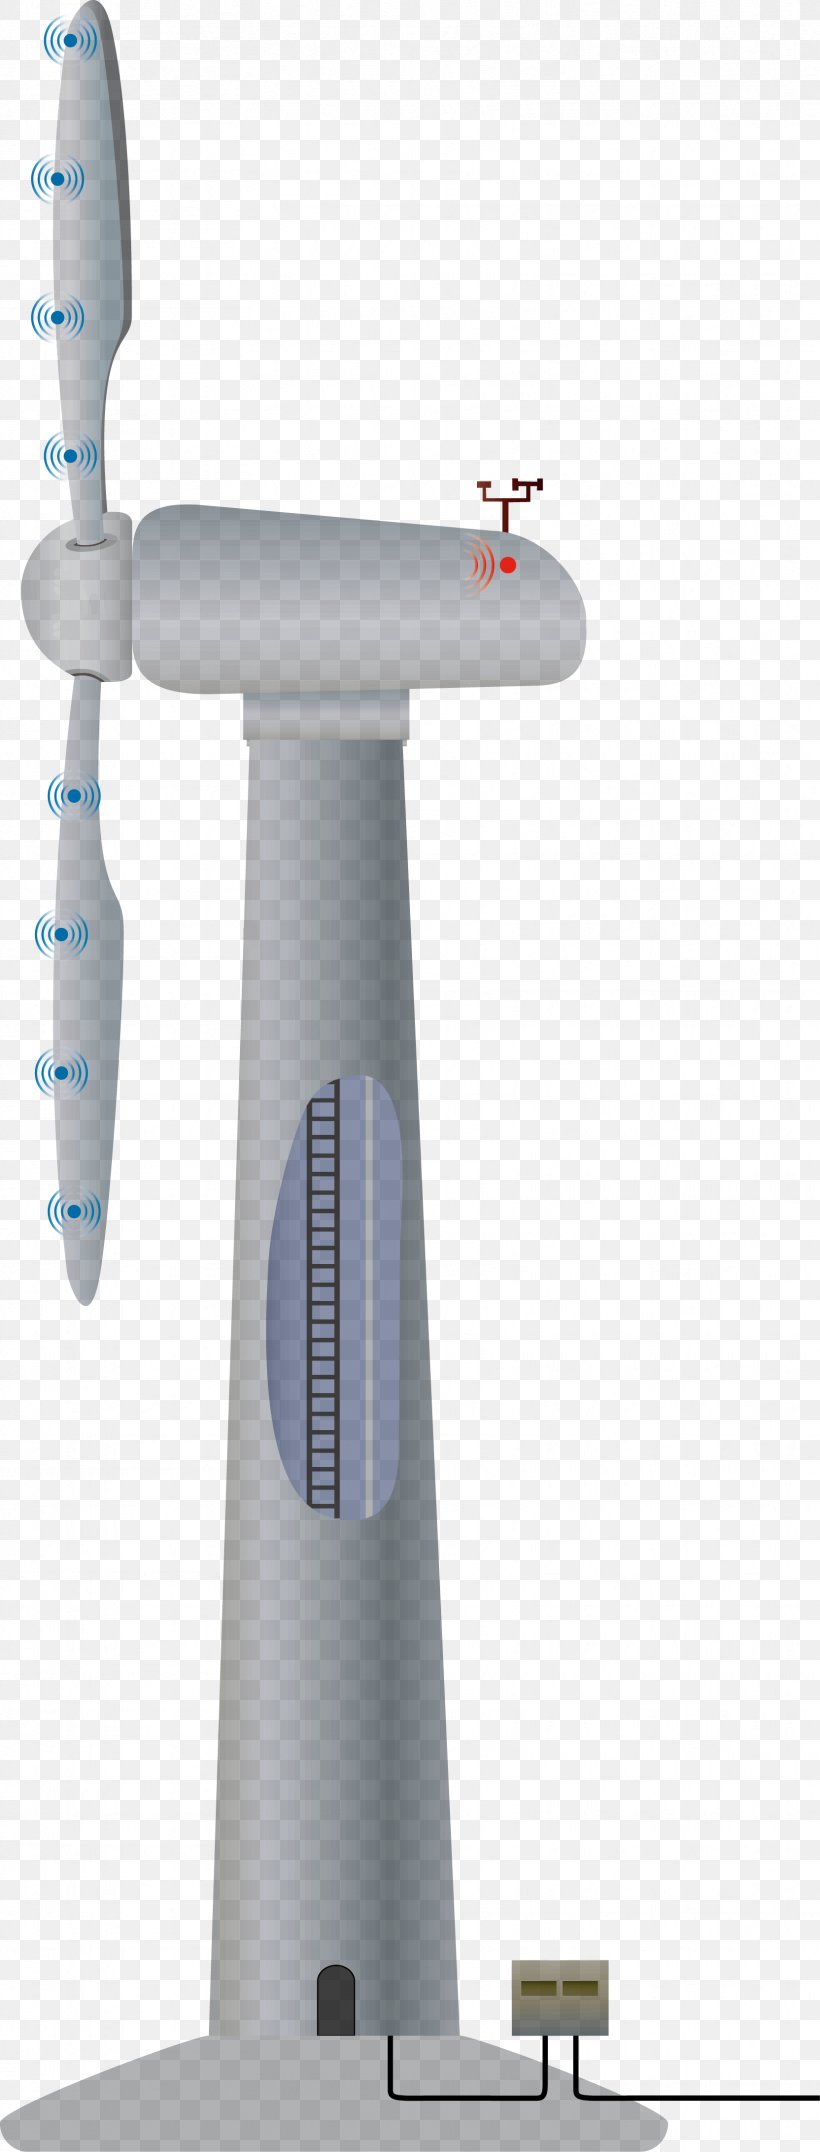 Eologix Sensor Technology Gmbh Industrial Design Temperature, PNG, 1664x4367px, Technology, Blade, Computer Hardware, Hardware, Icing Download Free